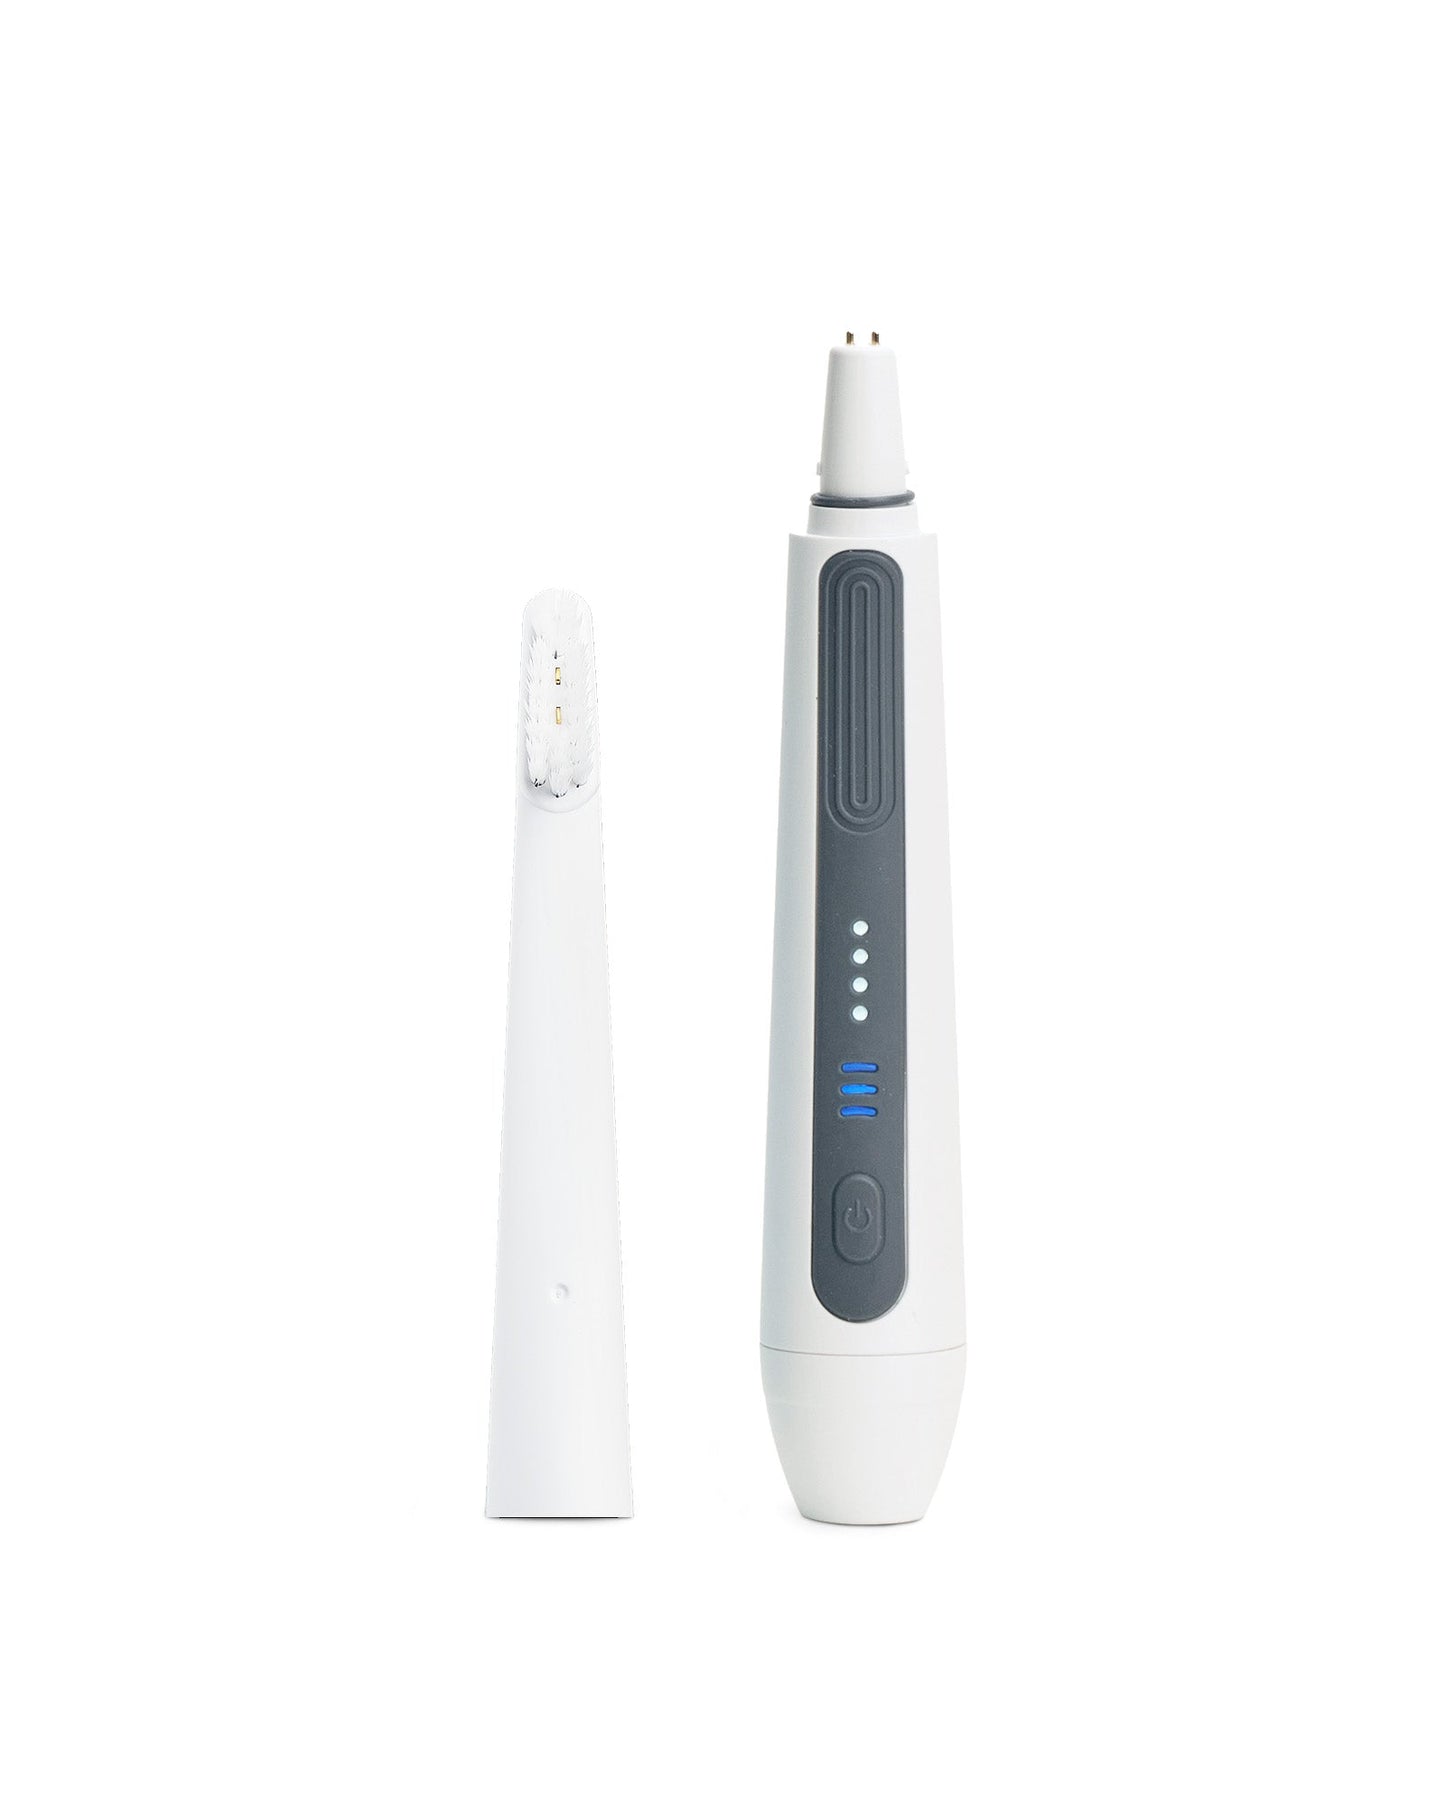 A replacement brush head for the Oreze toothbrush in pearl white